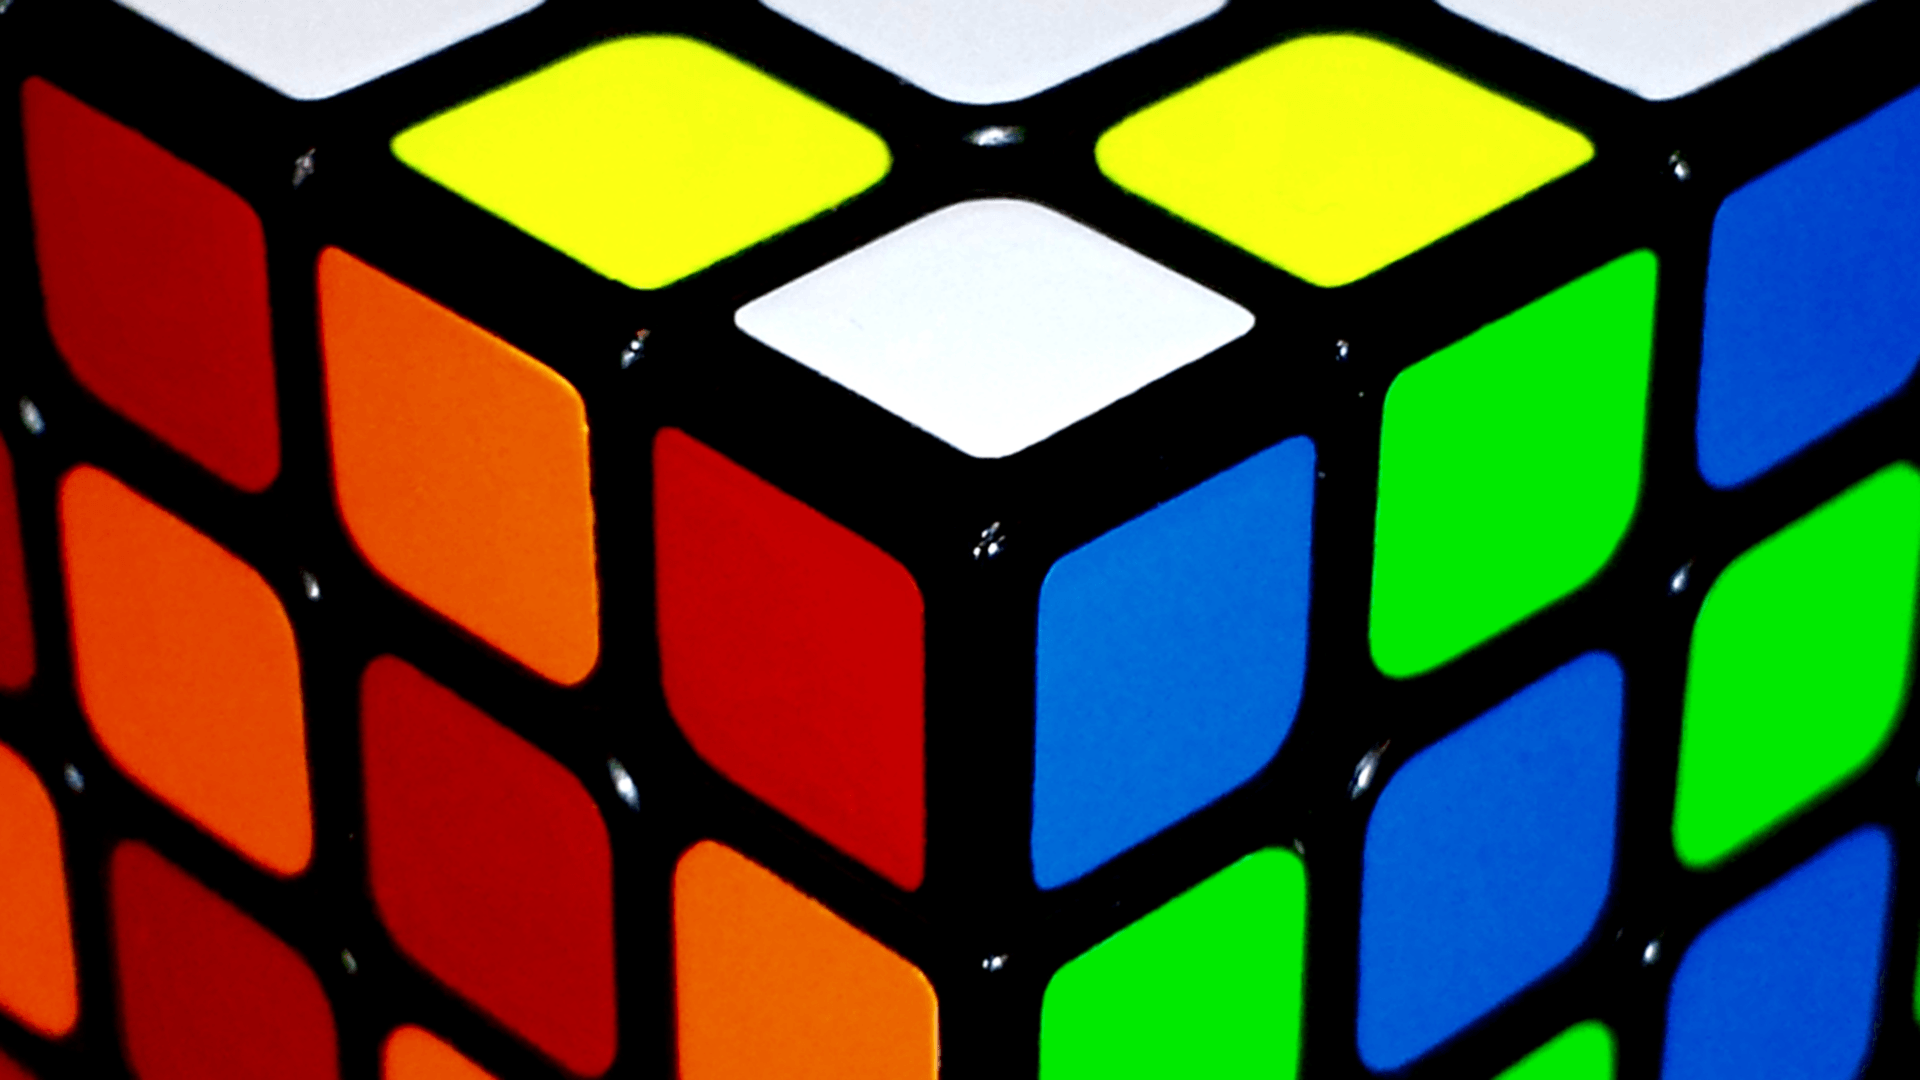 Rubiks Cube Up Close Wallpapers 62756 1920x1080 px ~ HDWallSource